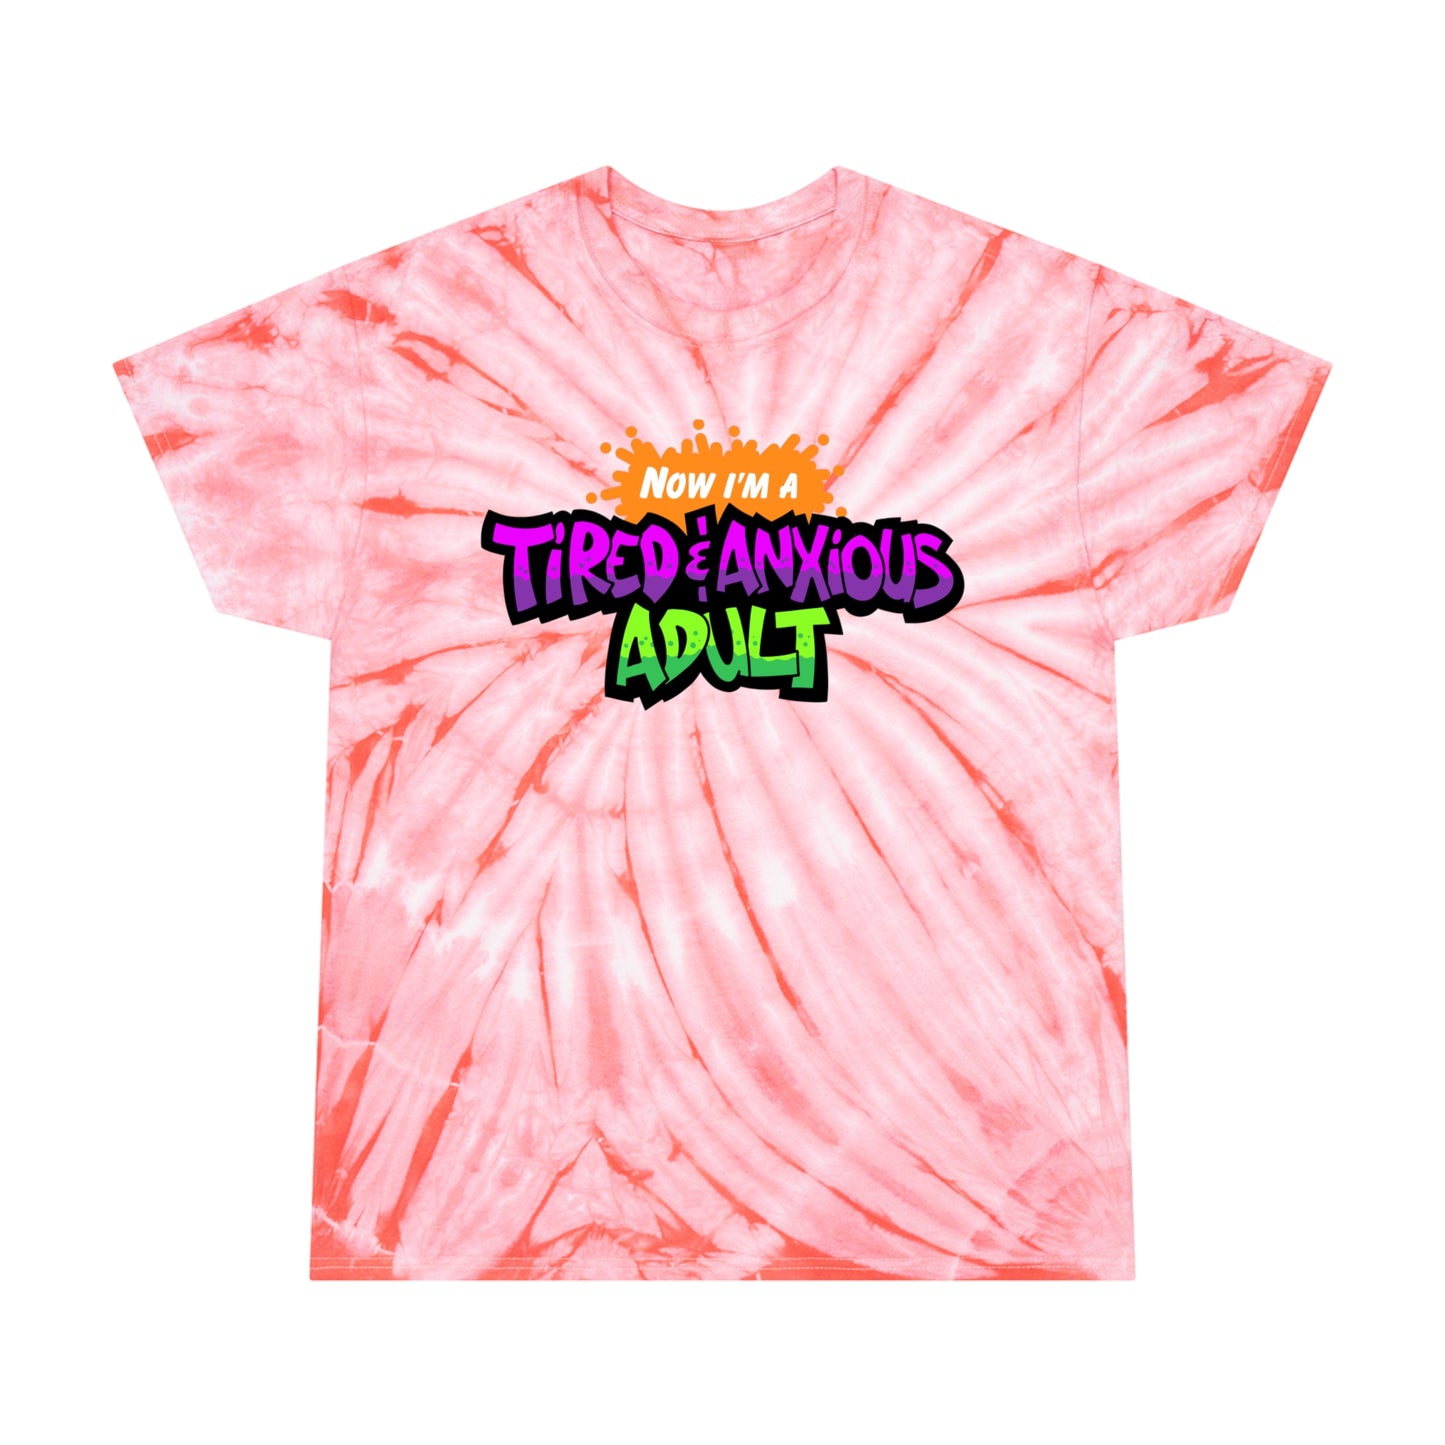 Tired & Anxious Adult FULL COLOR tie-dye t-shirt